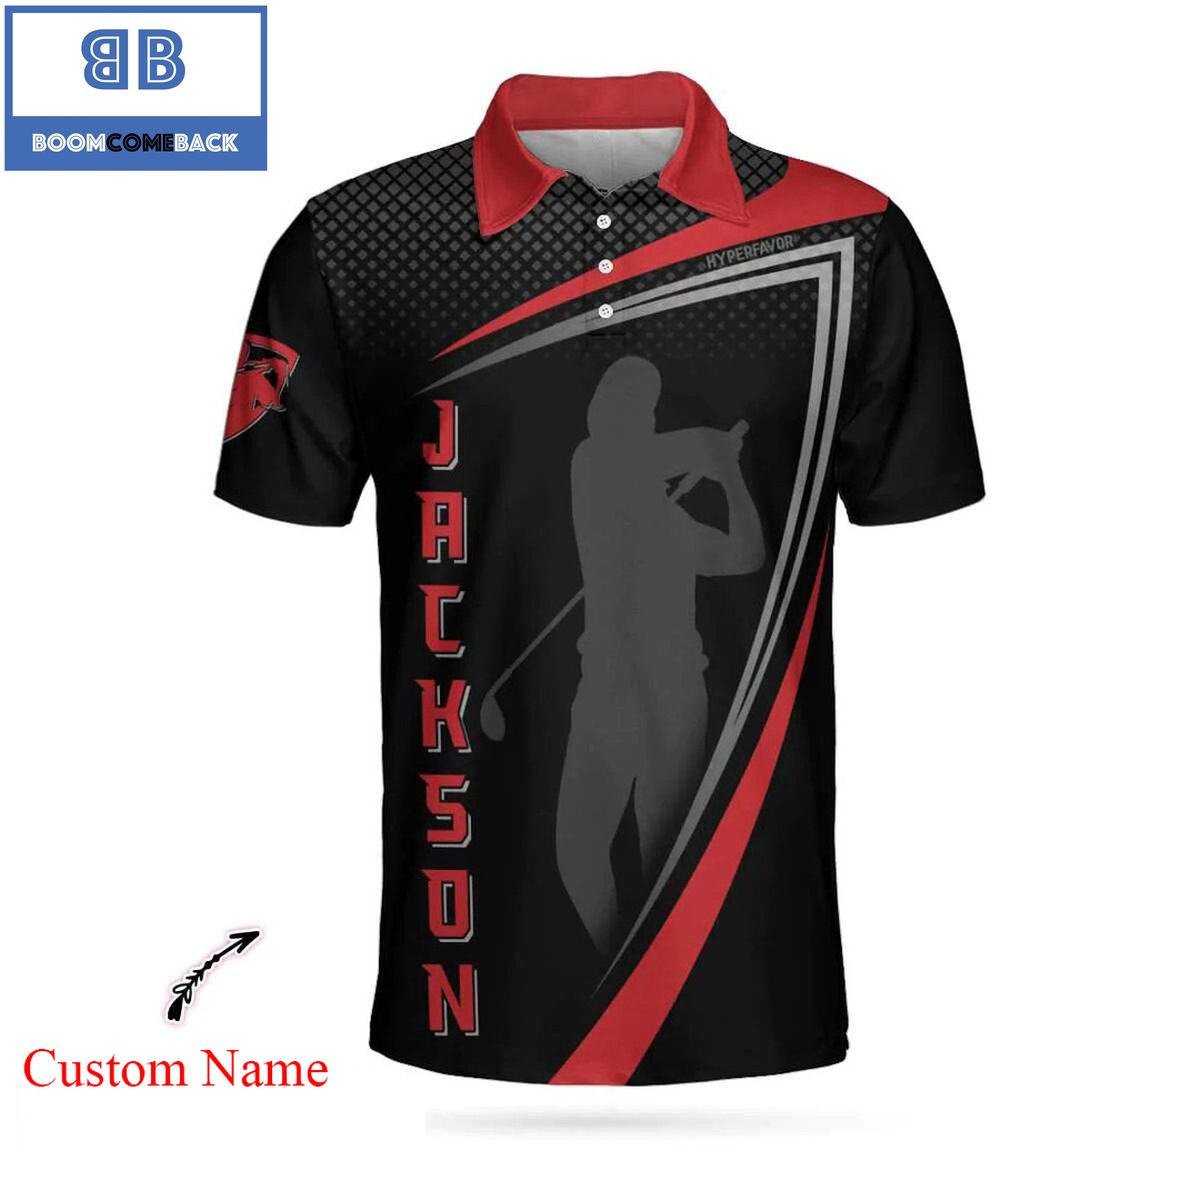 Personalized2BSport2BGolf2BWith2BGolfer2BSilhouette2BAthletic2BCollared2BMens2BPolo2BShirt2B3 sP2j2